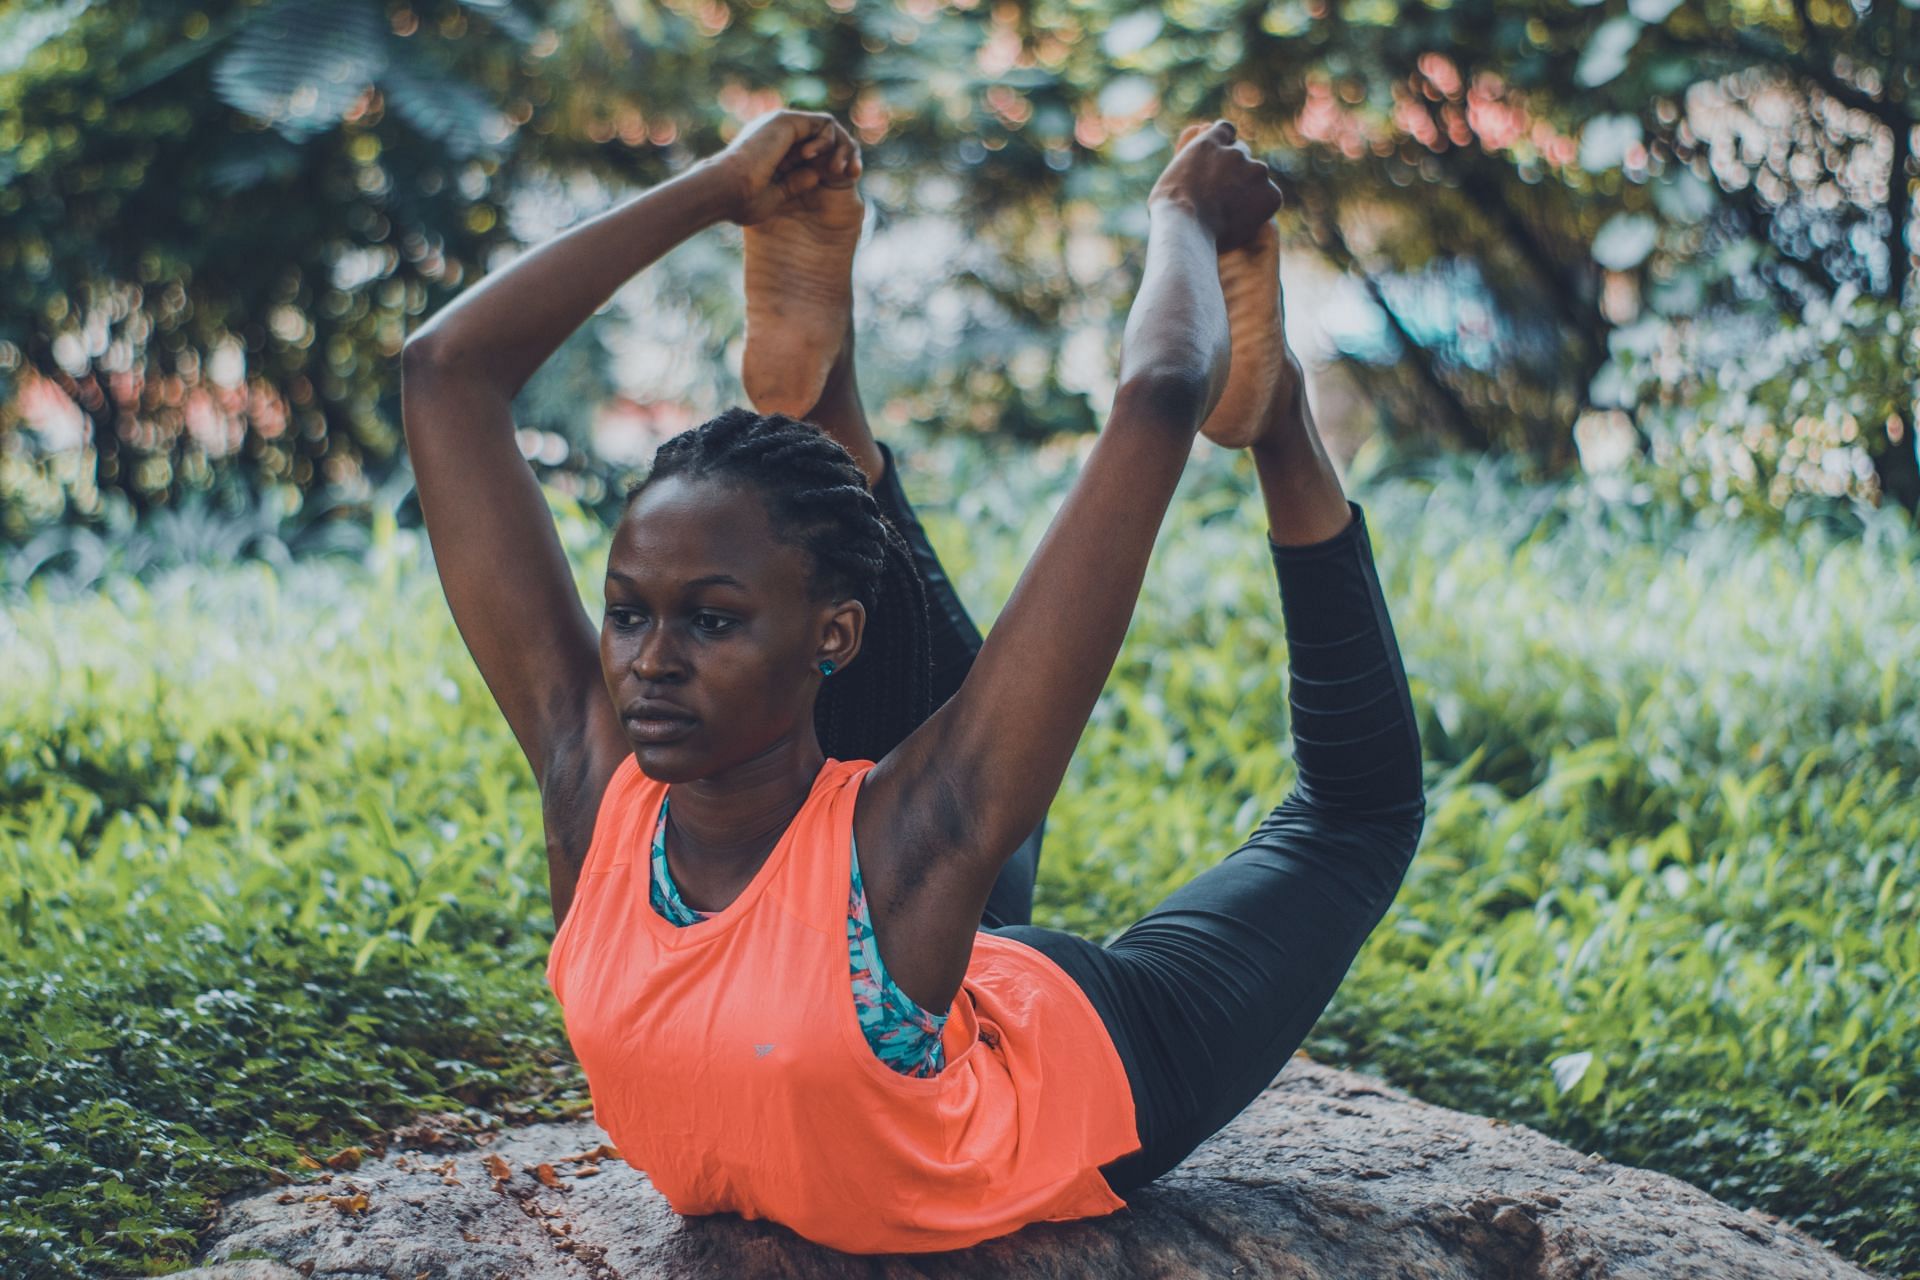 Bow pose in yoga stretches your lower back and hamstring. (Image via Pexels / Oluremi Adebayo)